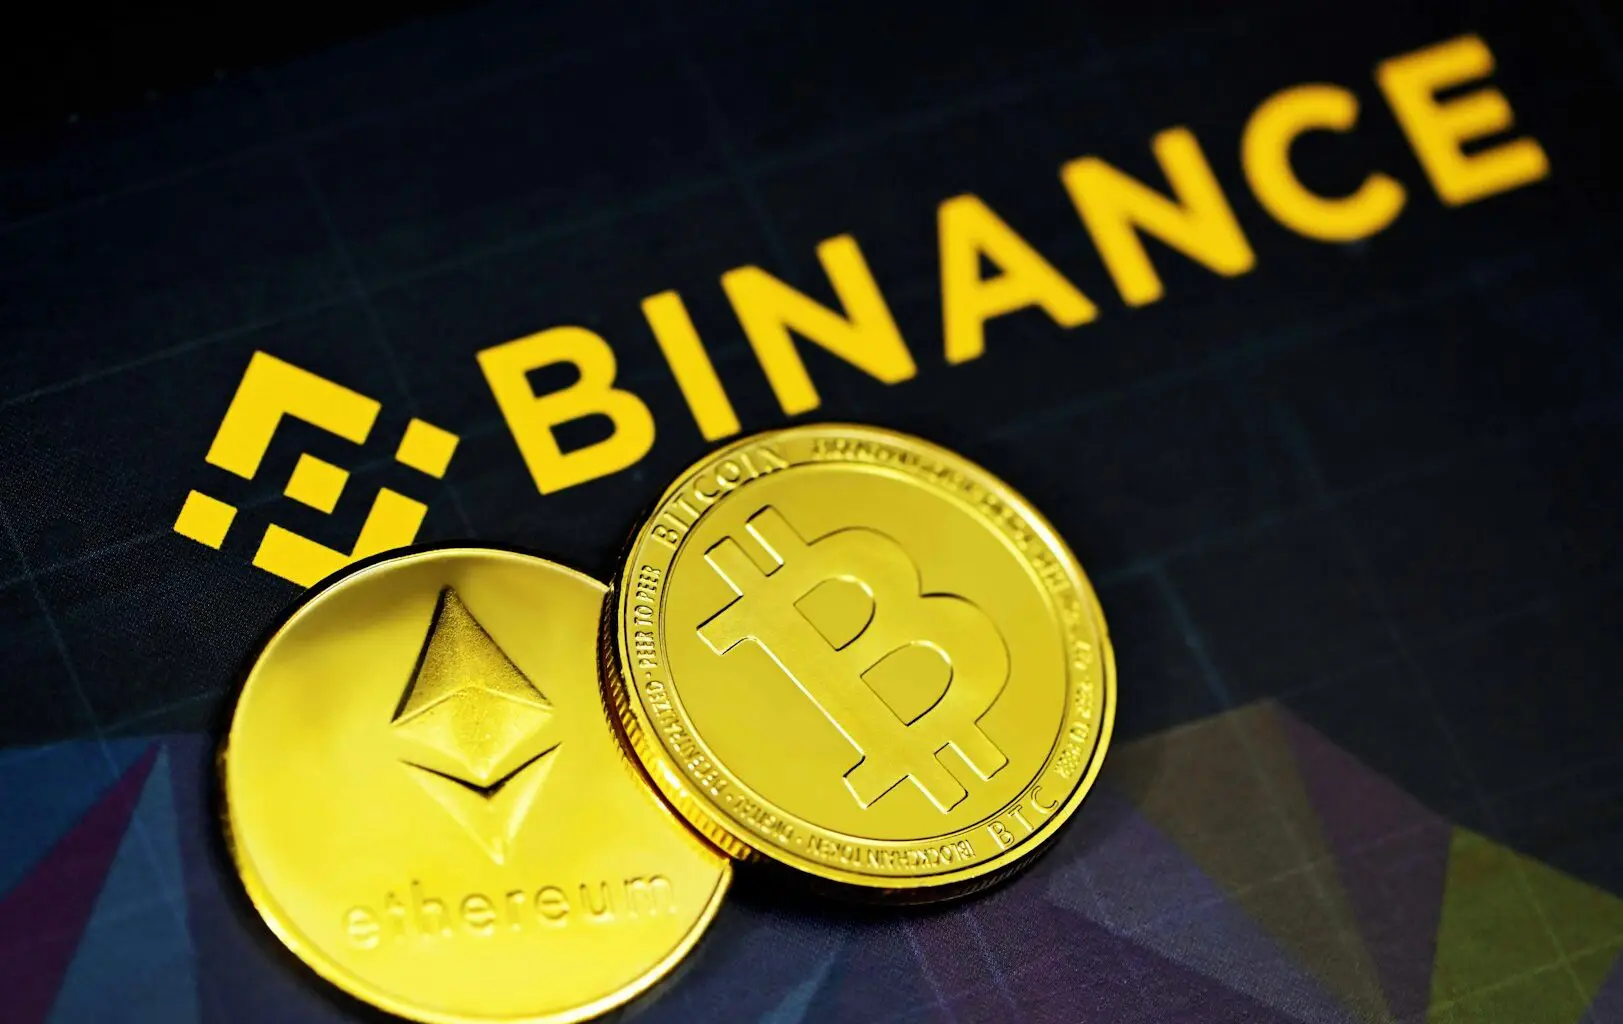 Two gold-colored cryptocurrency coins with 'Bitcoin' and 'Ethereum' logos on them, placed on a surface with the word 'BINANCE' in the background.